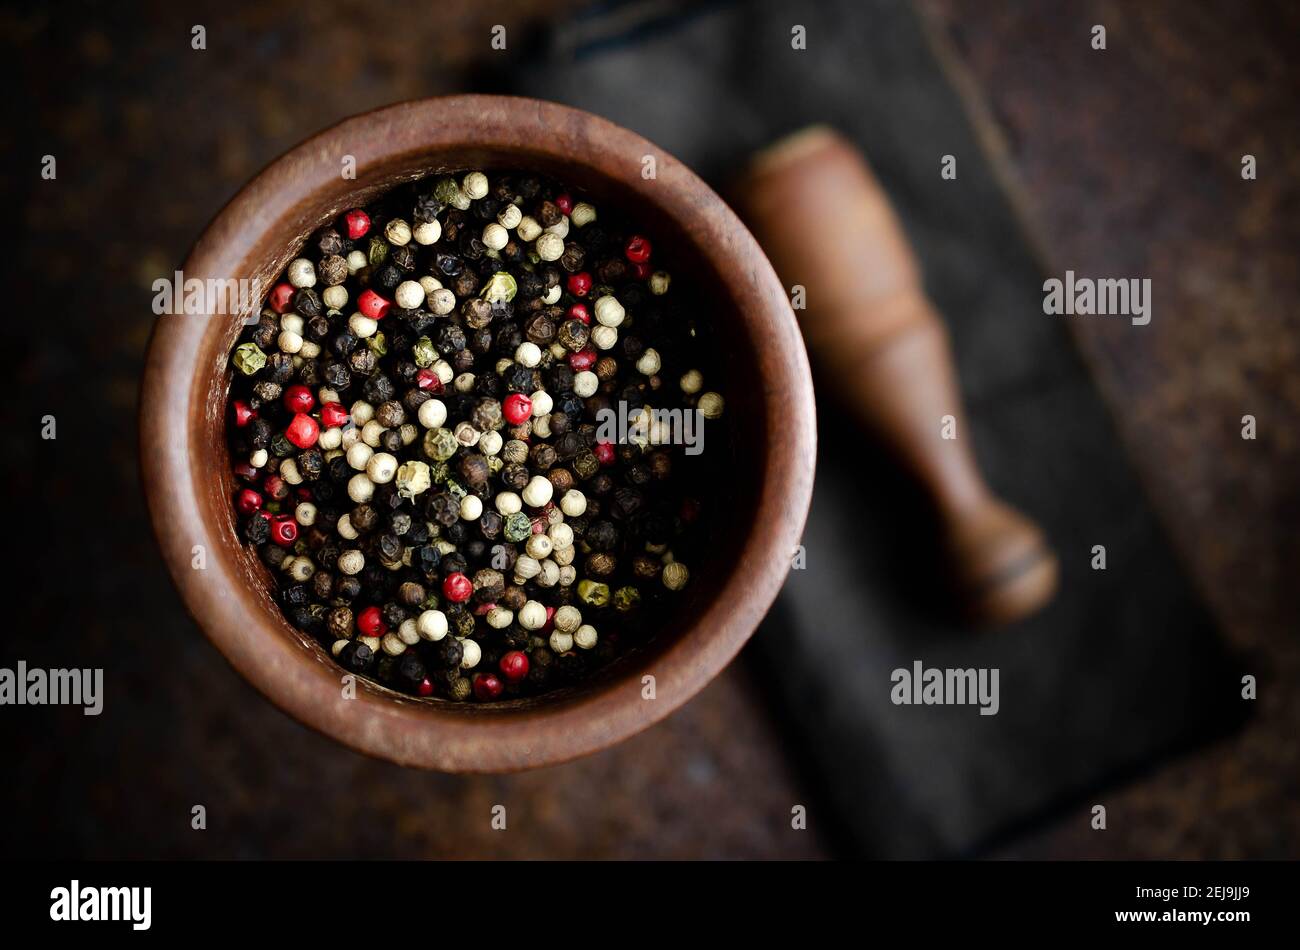 Black, white, green, and pink peppercorns in a wooden mortar with pestle on a brown napkin and dark backdrop. Stock Photo